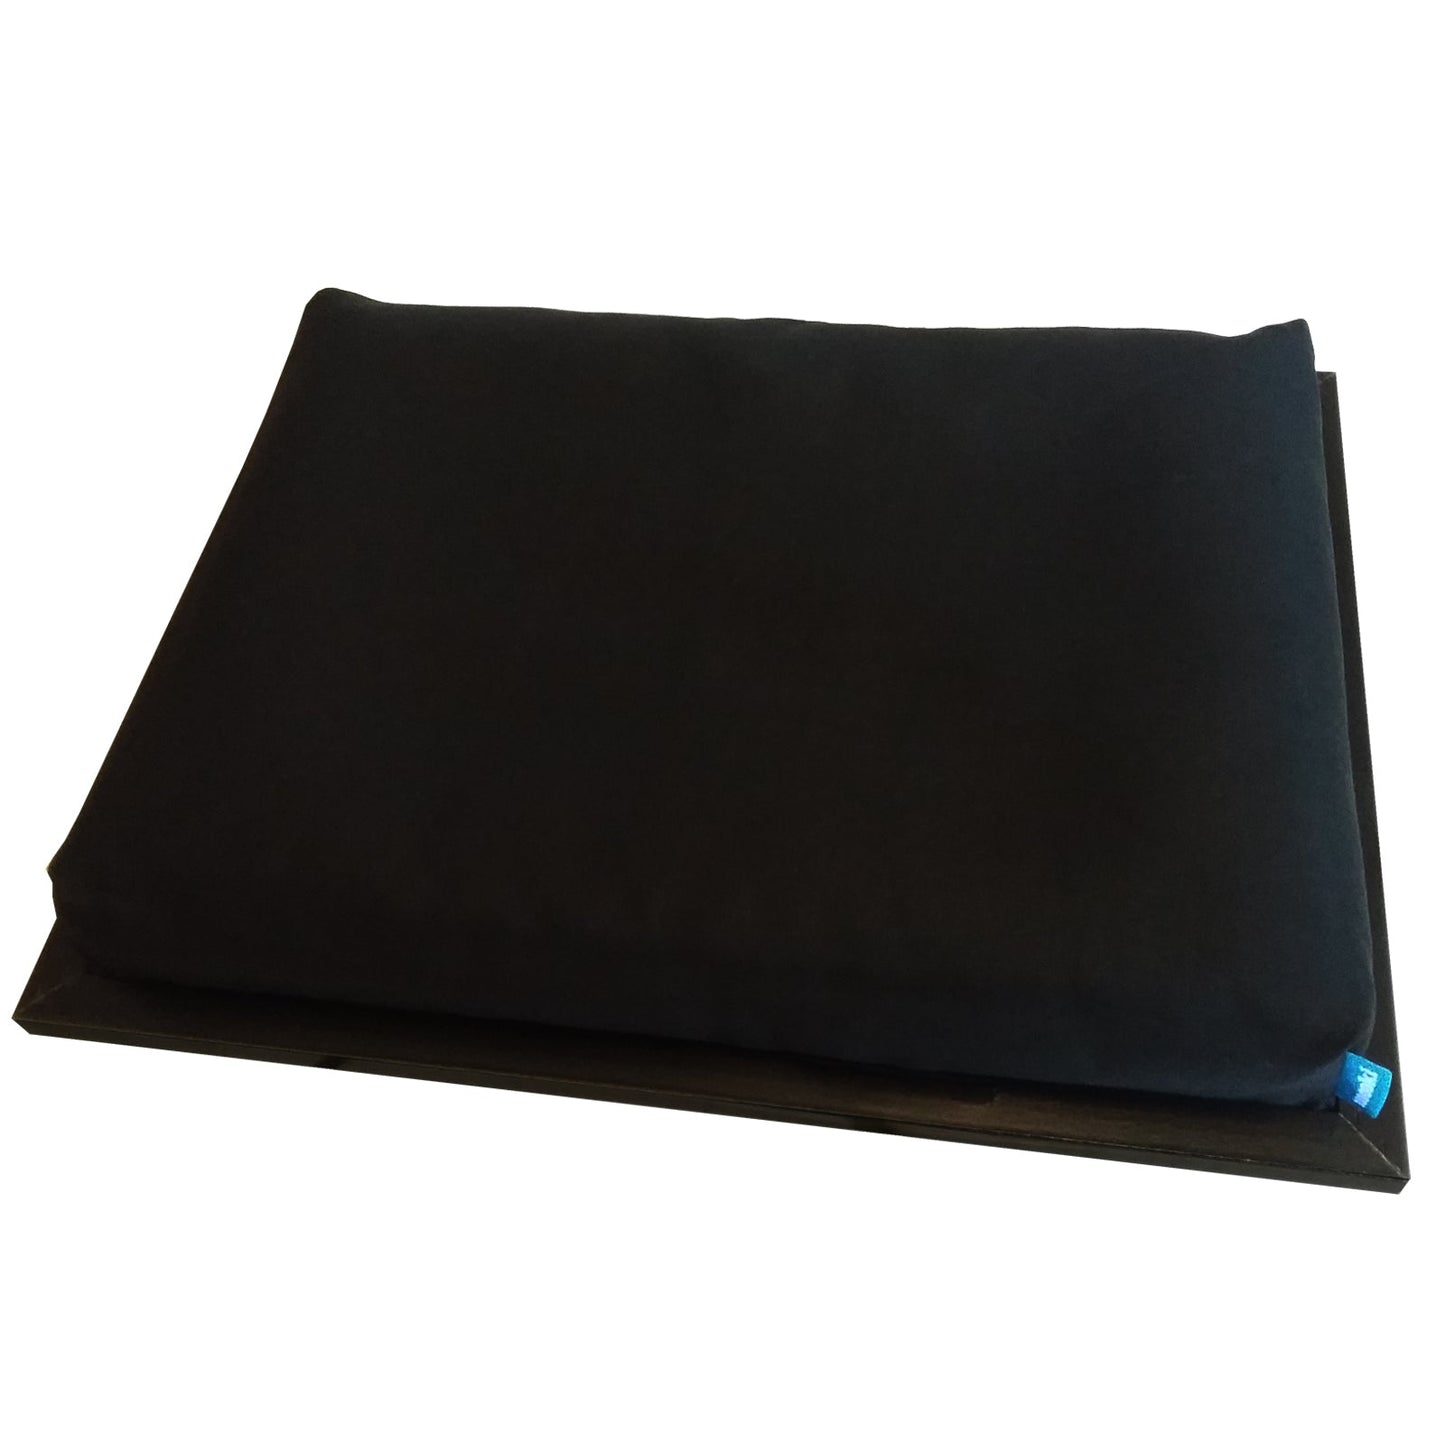 Downtown Manhattan at Night Cushioned Lap Tray